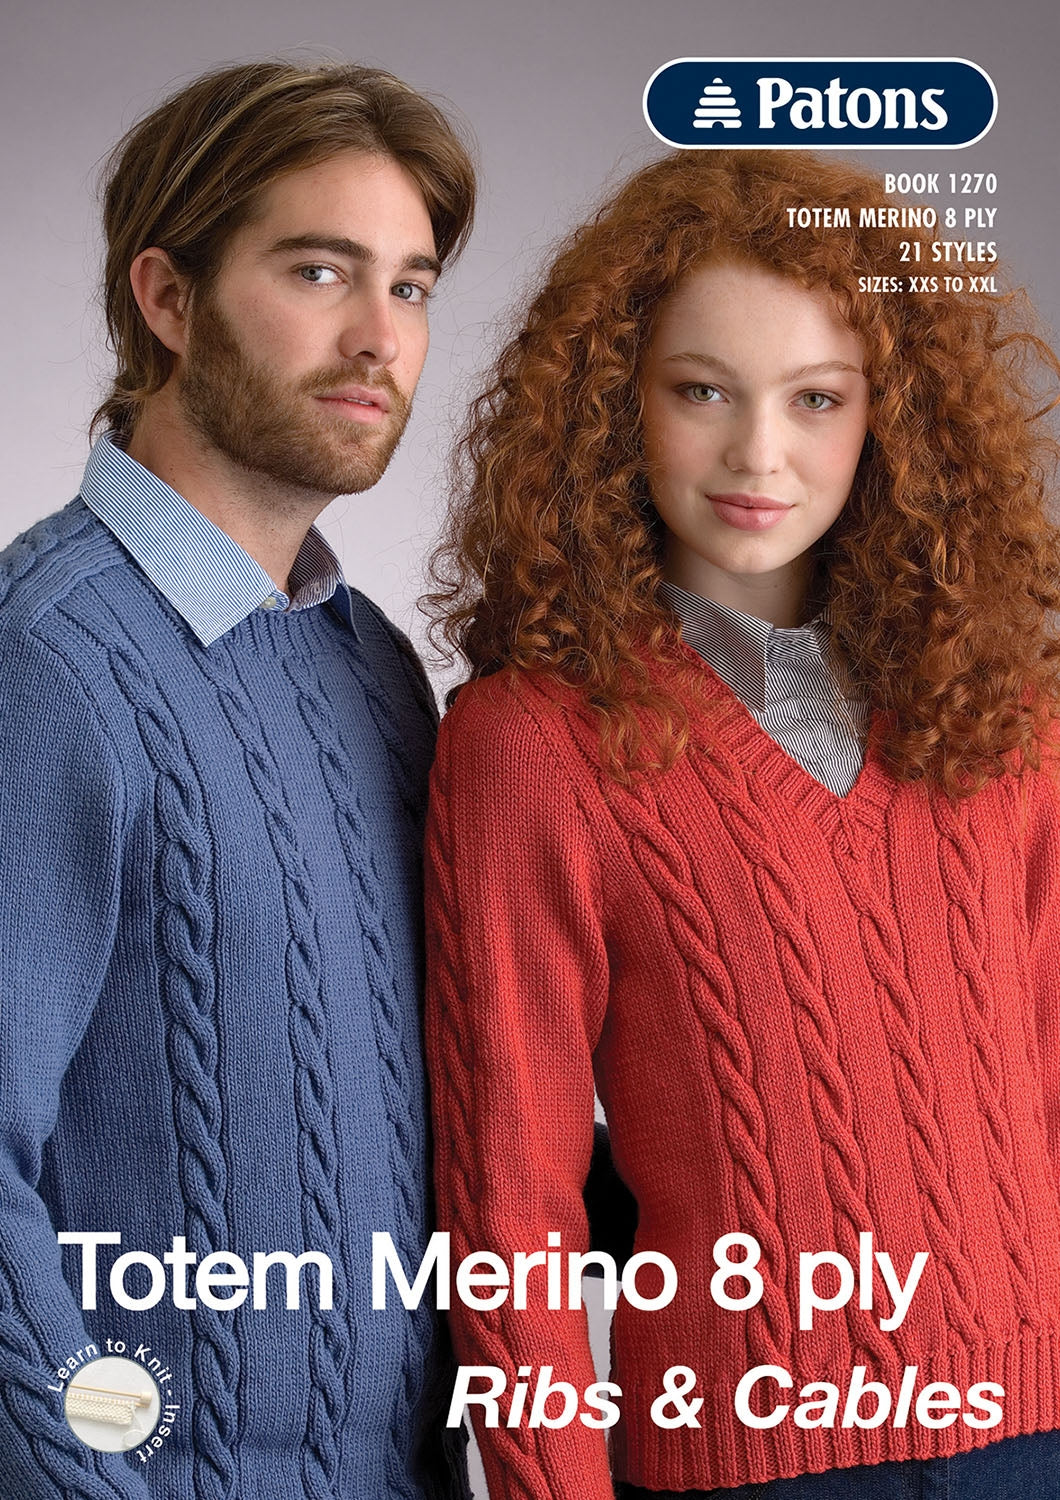 Book 1270 - Patons Merino Totem DK Ribs and Cables